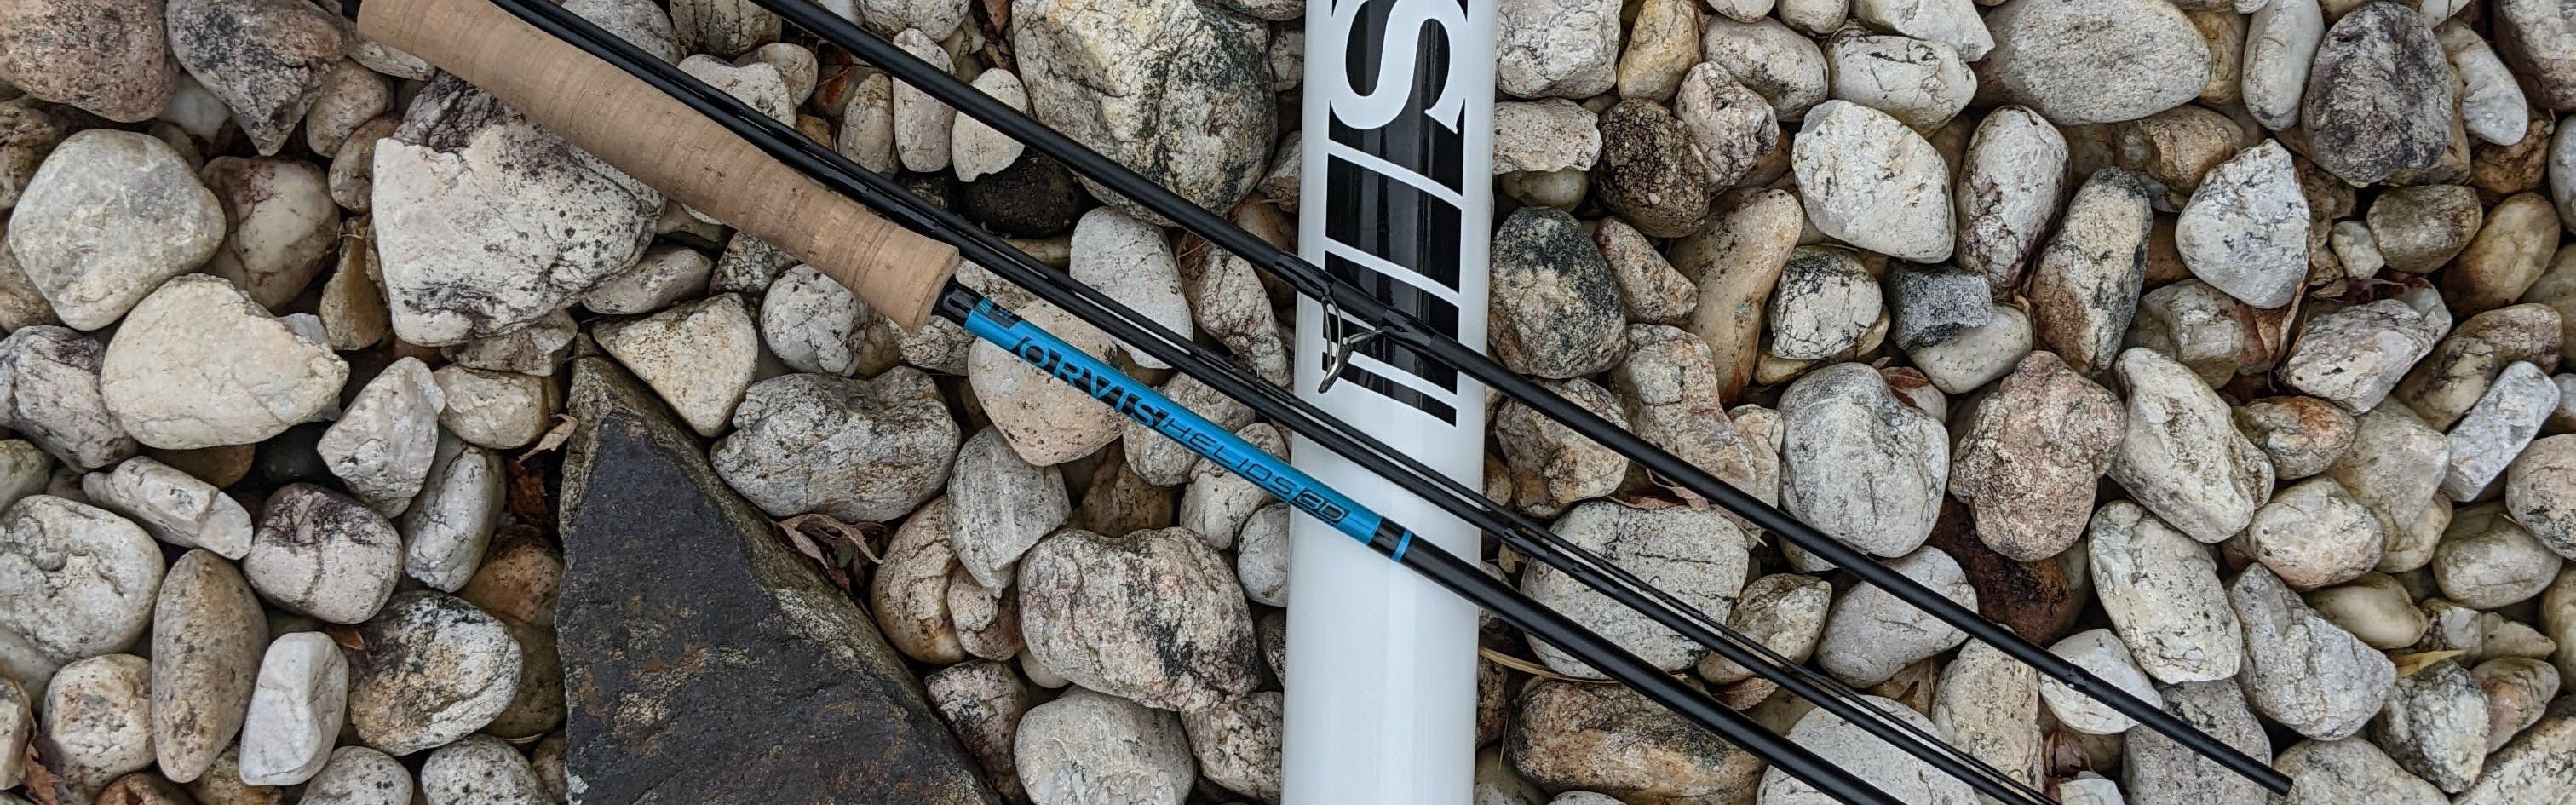 H3 Fly Rod Review: A Day with the Orvis Helios 3 - TRR Outfitters